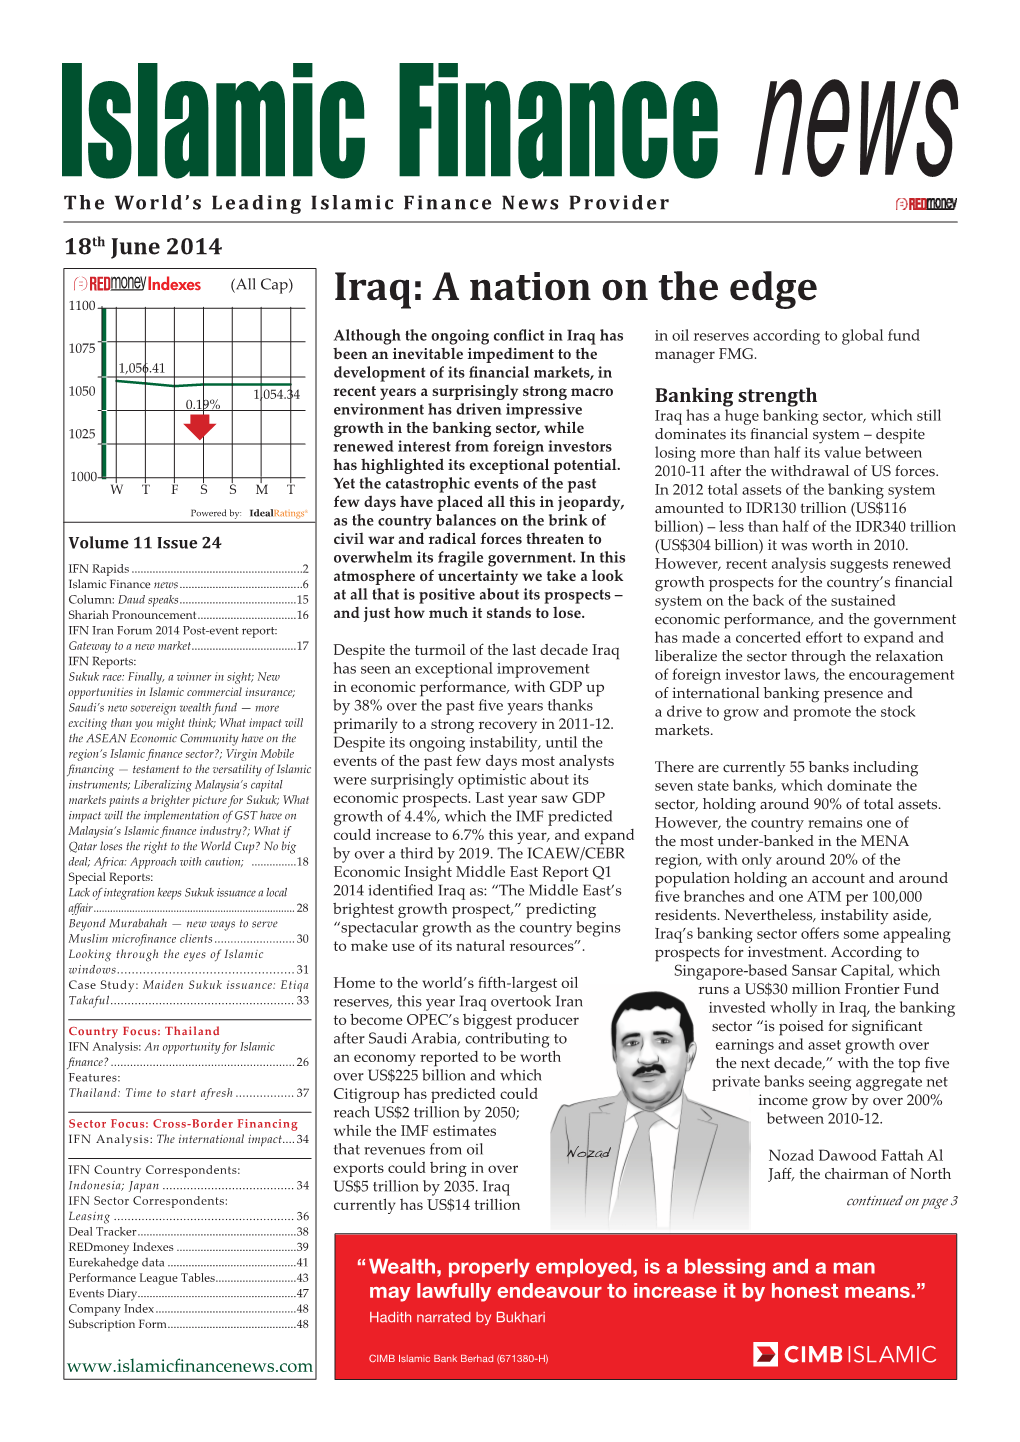 Iraq: a Nation on the Edge